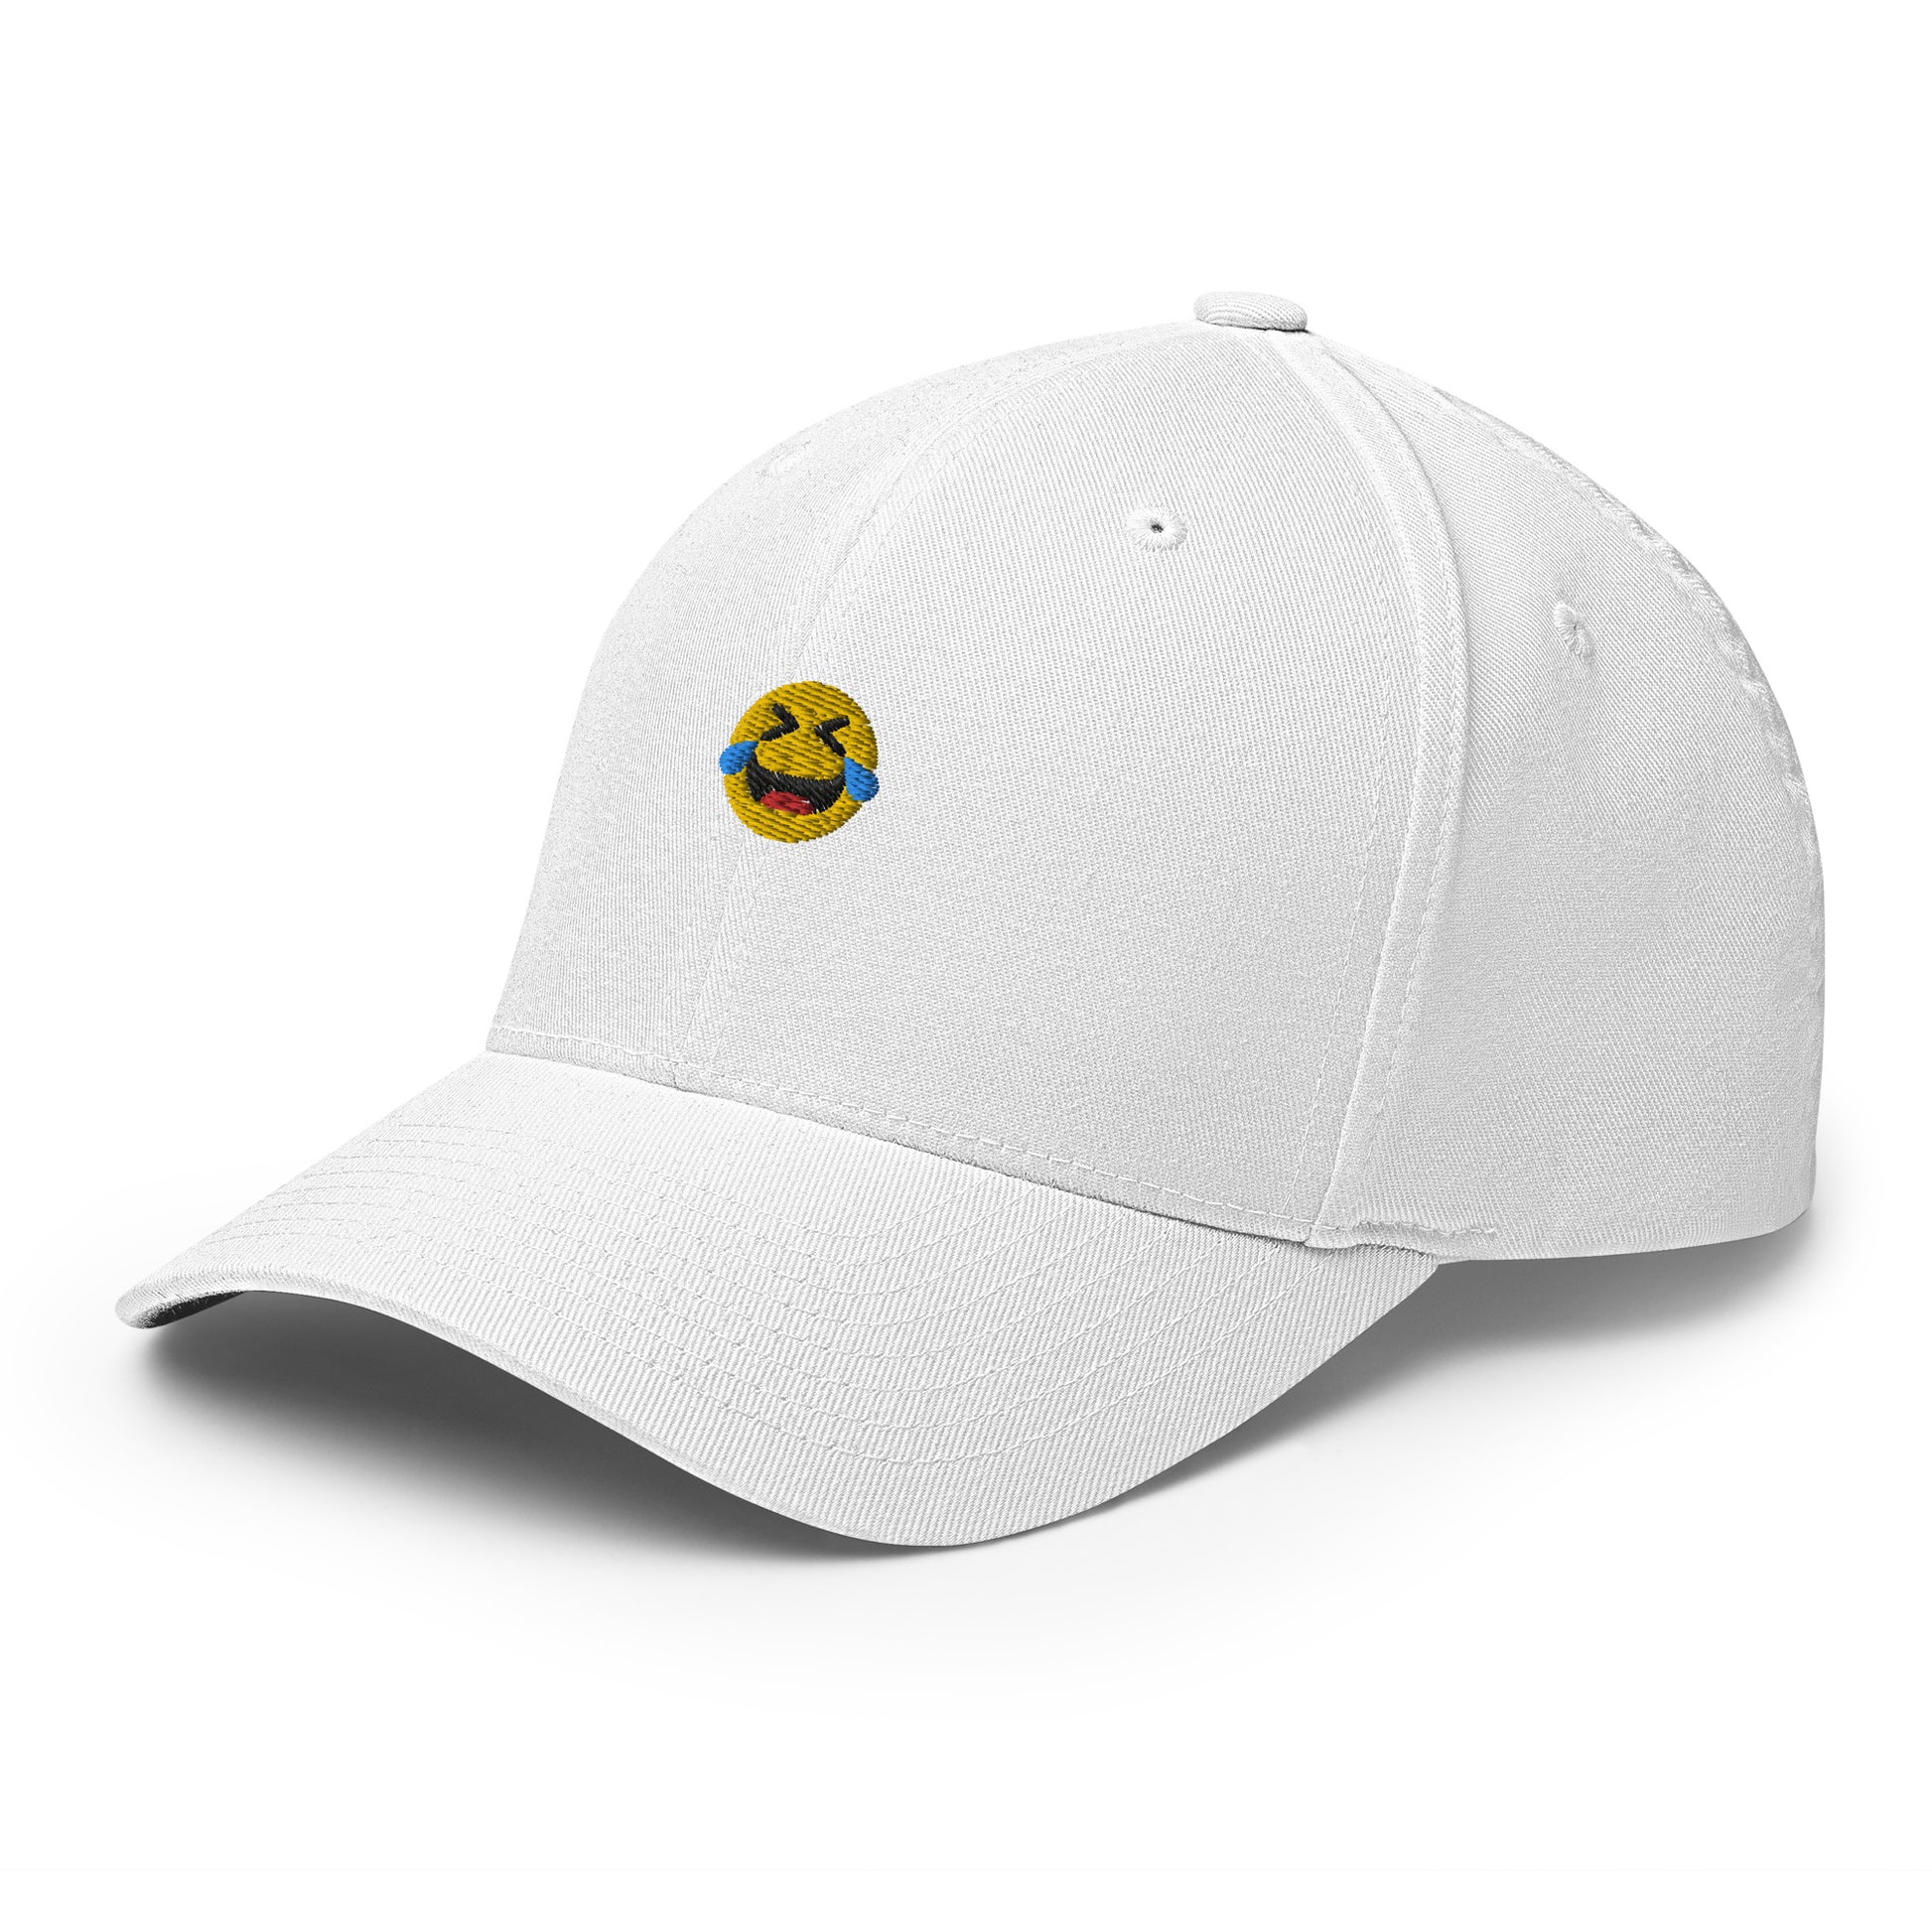  cap-from-the-front-with-emoji-symbol